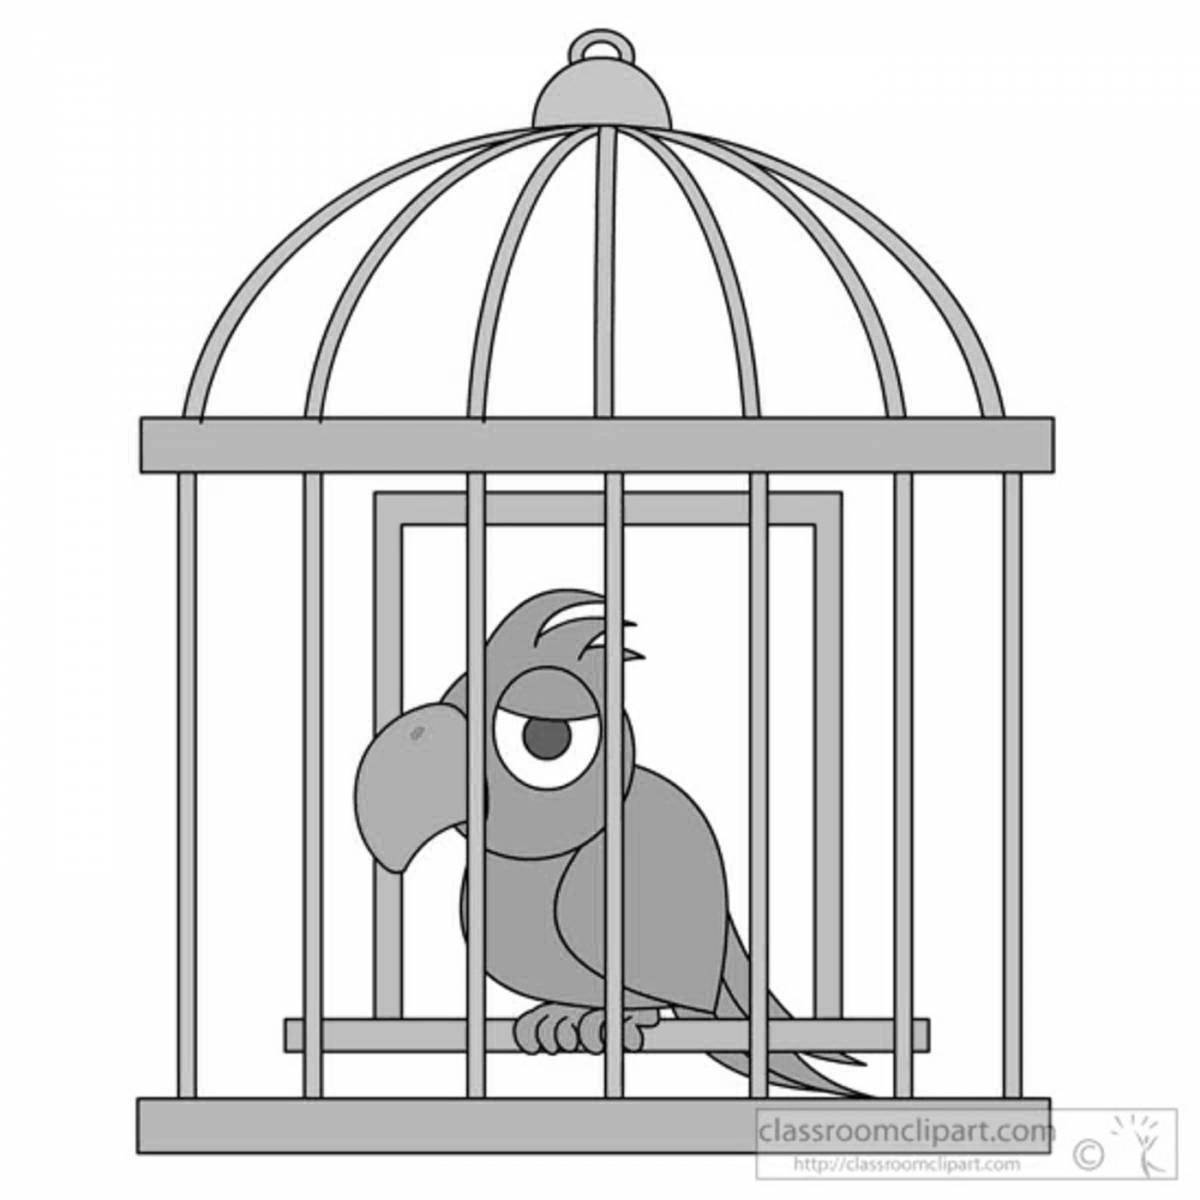 Jolly parrot in a cage